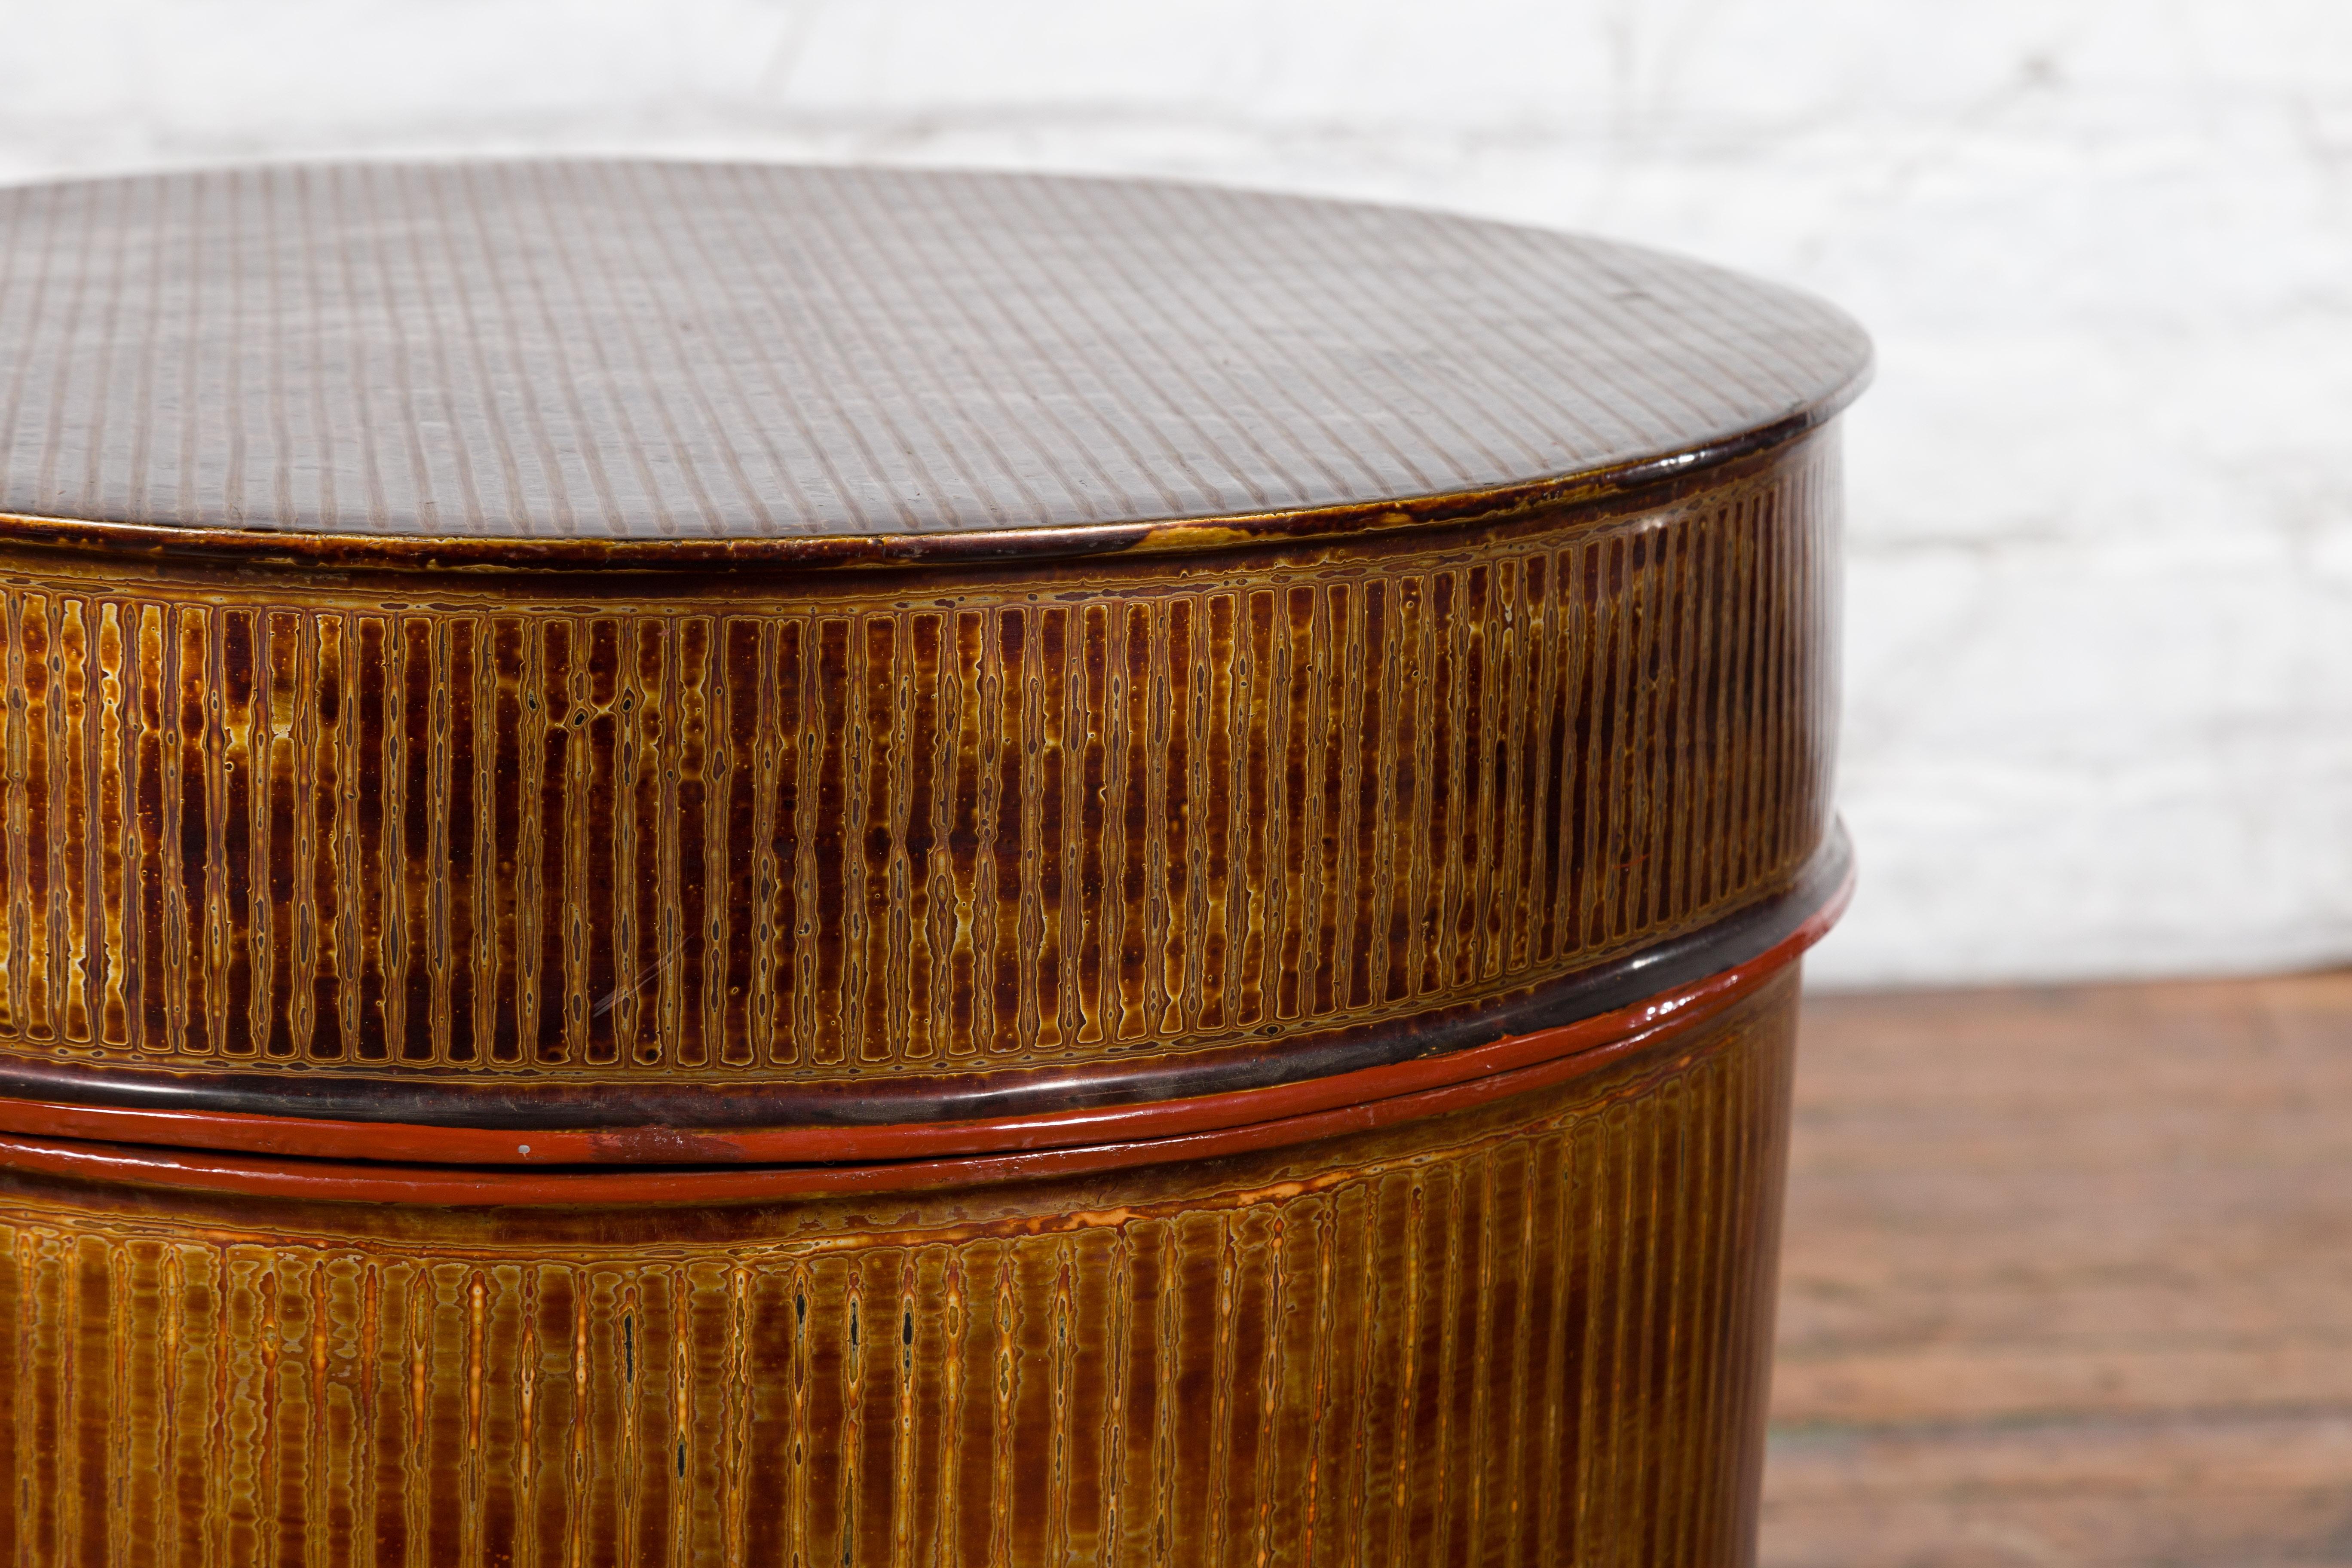 Burmese Vintage Negora Lacquer Circular Storage Bin with Vertical Stripes For Sale 2